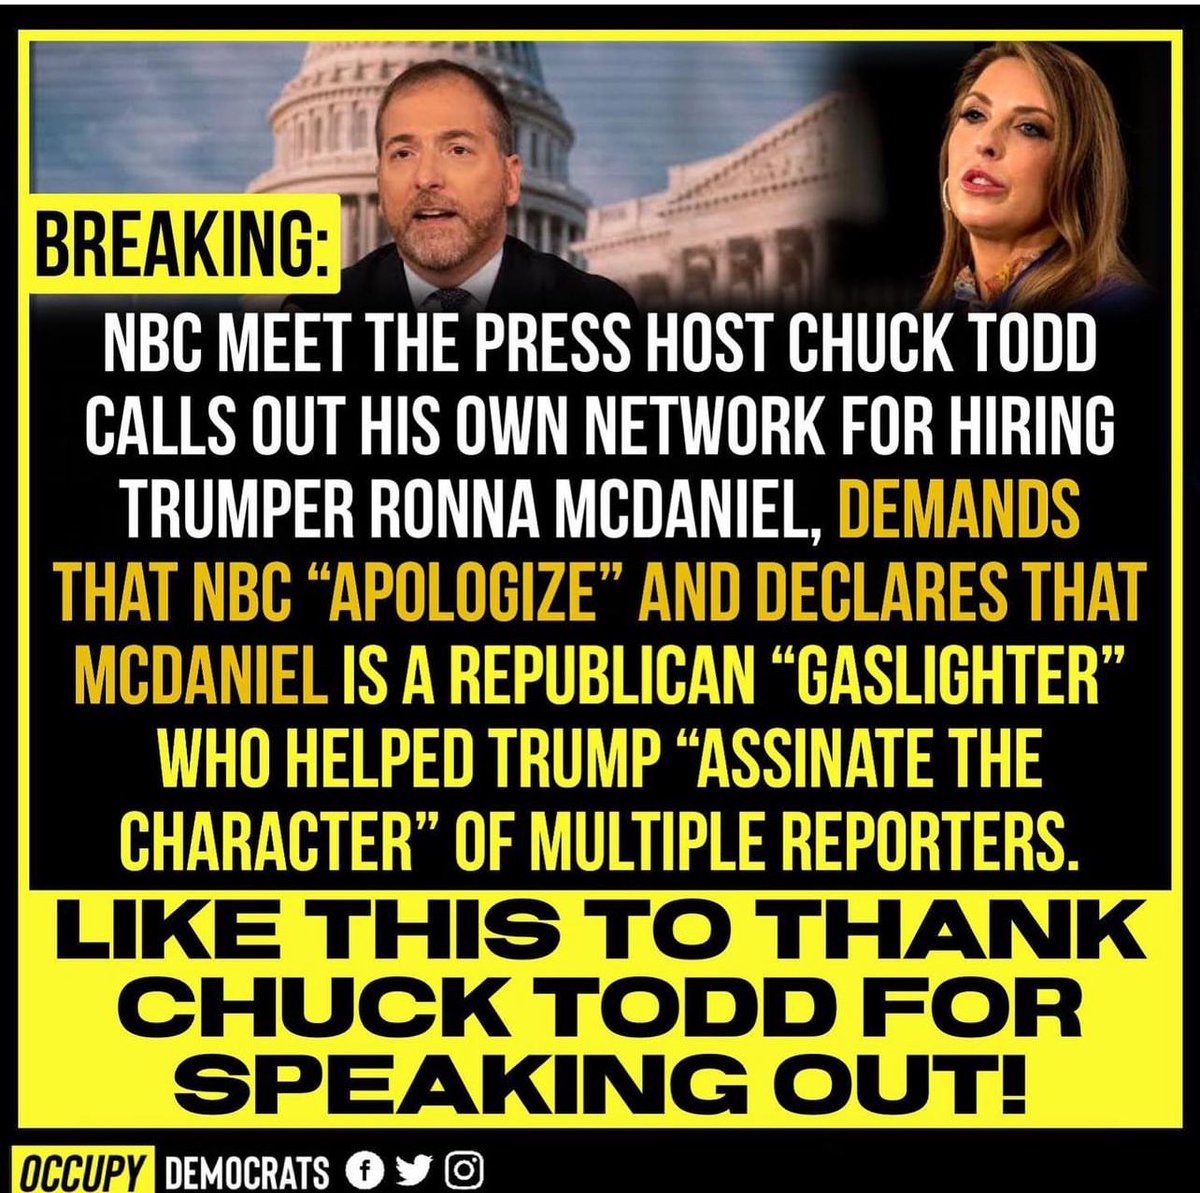 Thank you @chucktodd for speaking out on this disastrous hire!! WTF @NBCNews what were you thinking? Or not! #ChuckTodd #NBCNews